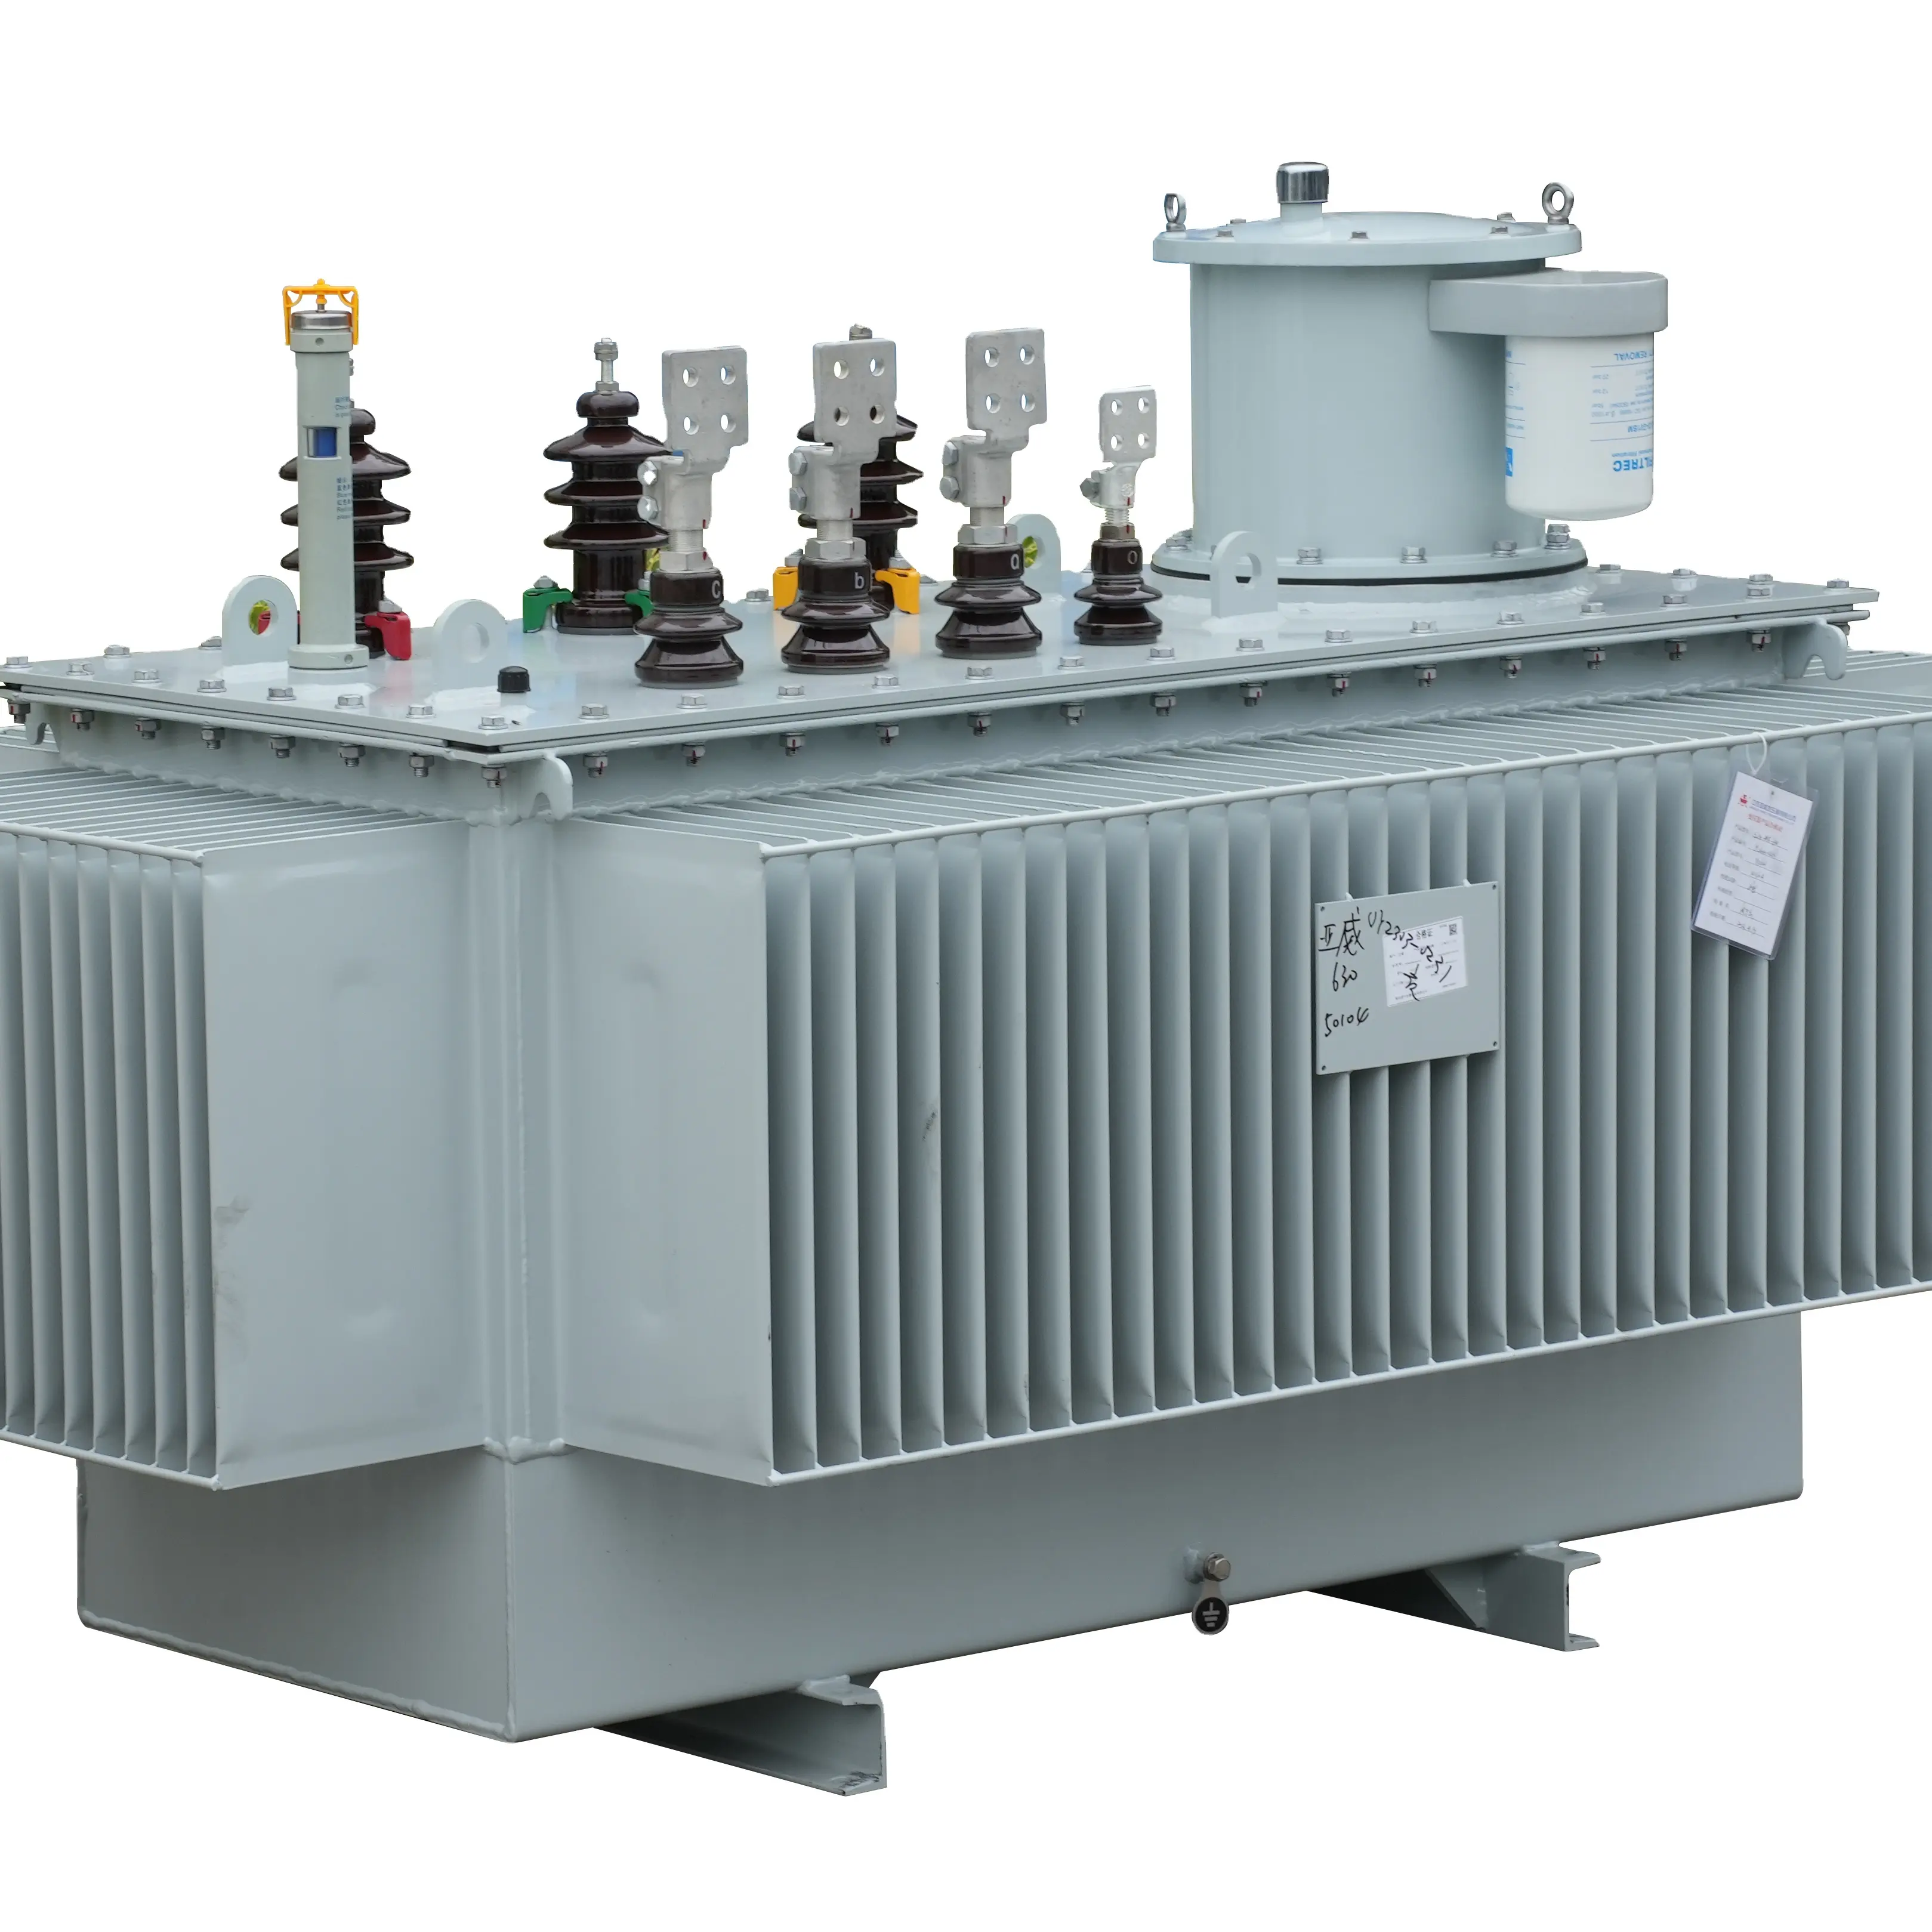 Yawei transformer brands electrical equipment high voltage and high frequency three phase 11kV 1000kVA transformers oil